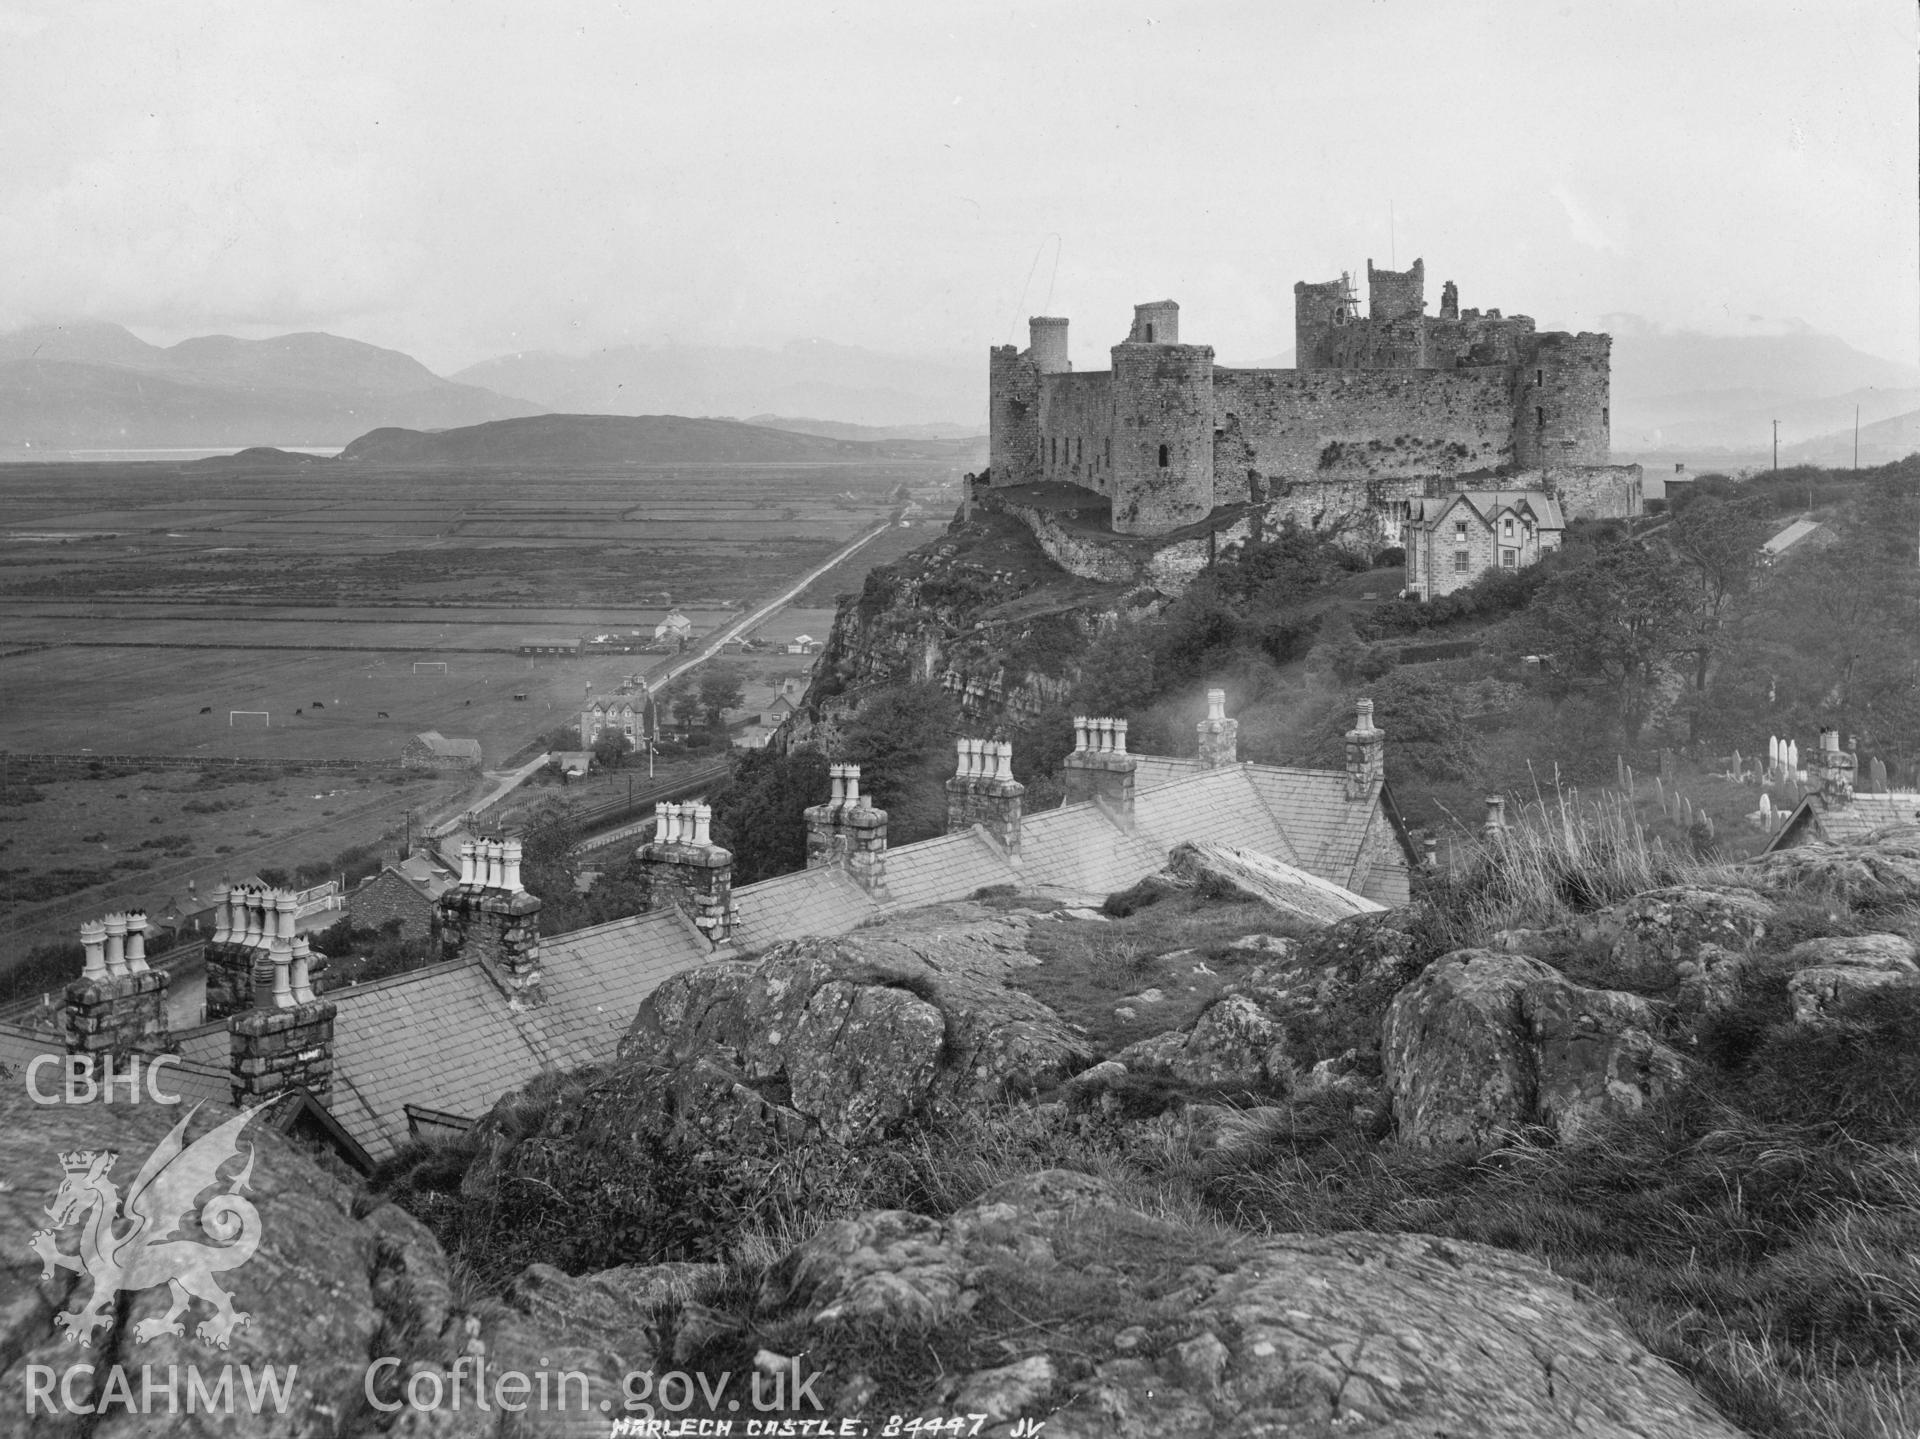 Digital copy of a black and white photograph relating to Harlech Castle: general view from south/ south-west.